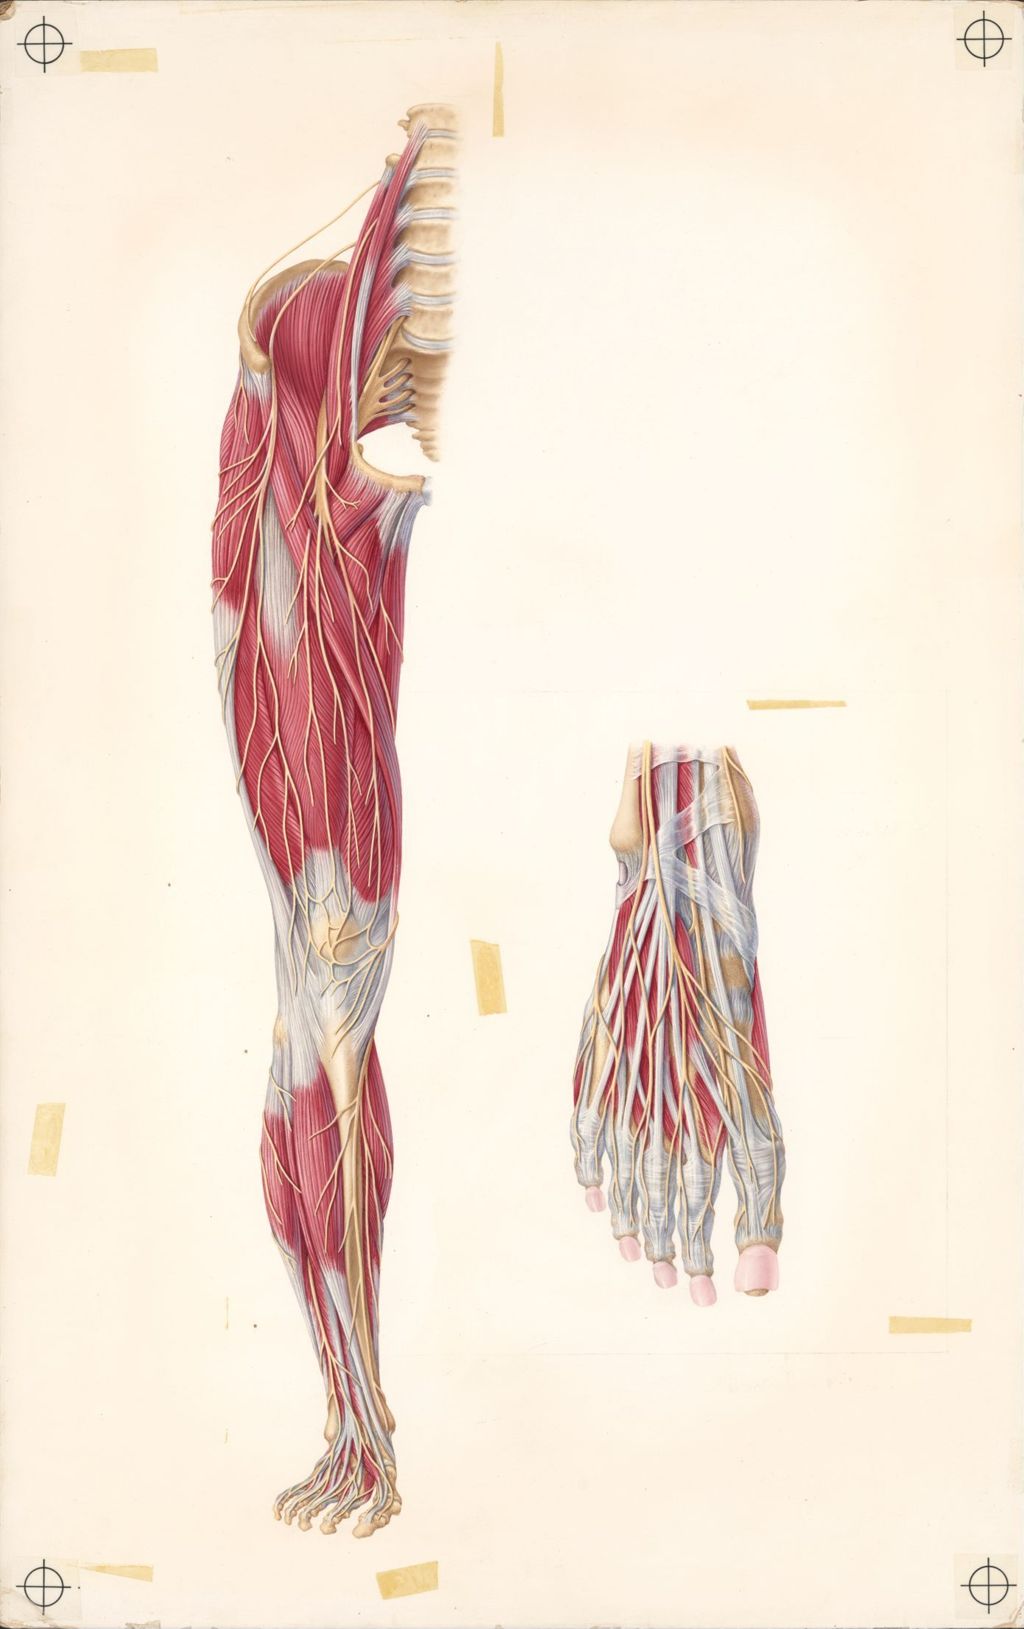 Doctor-Patient Explanatory Atlas of Anatomy, The Cutaneous Nerves of the Lower Limb Superimposed on the Musculature